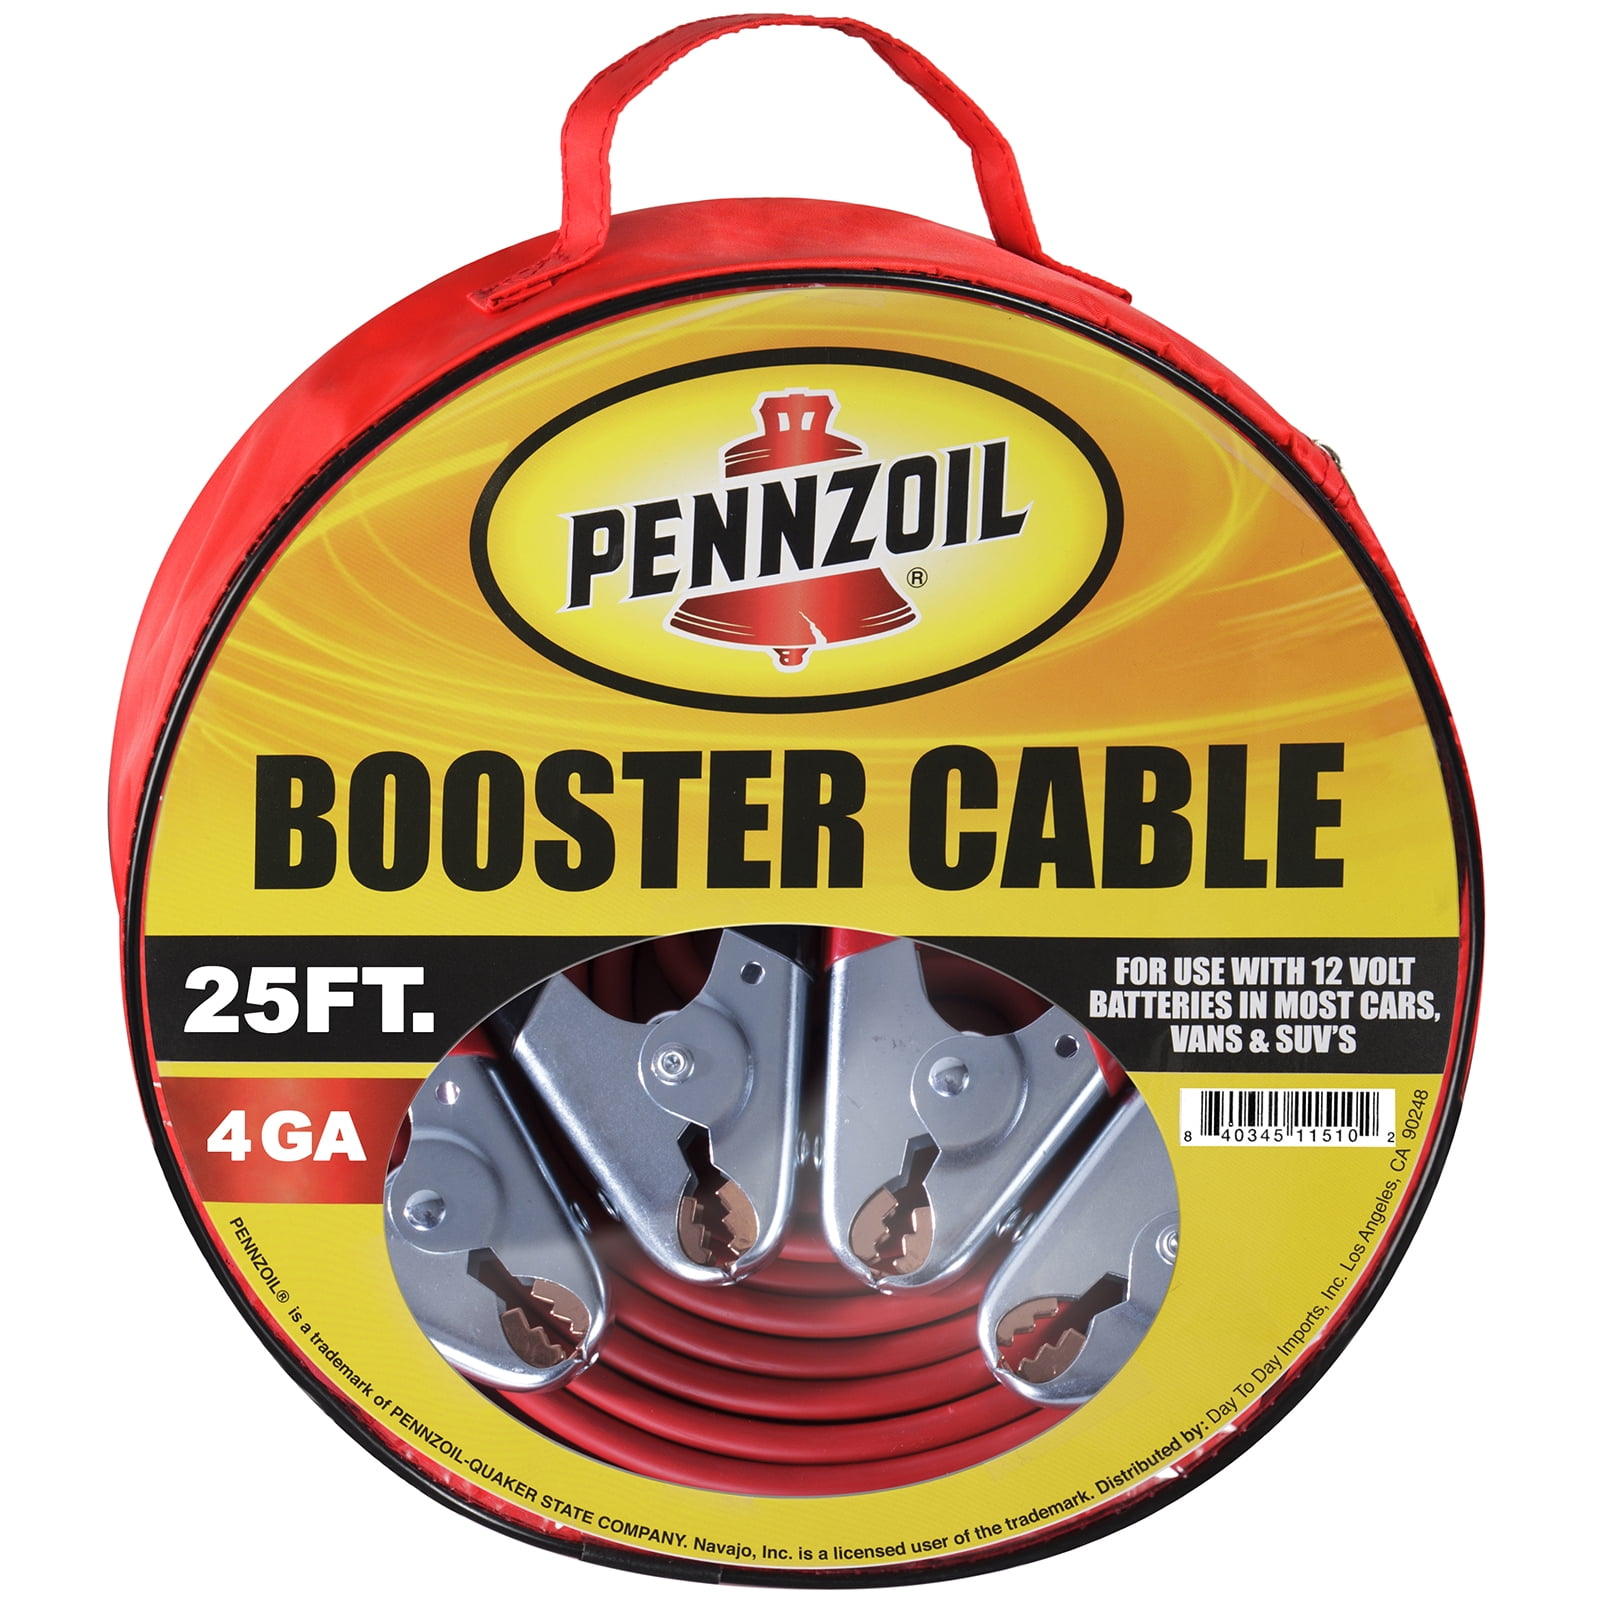 Pennzoil Jumper Cable Heavy Duty Battery Booster 4 Gauge 25 Feet with Carry Bag